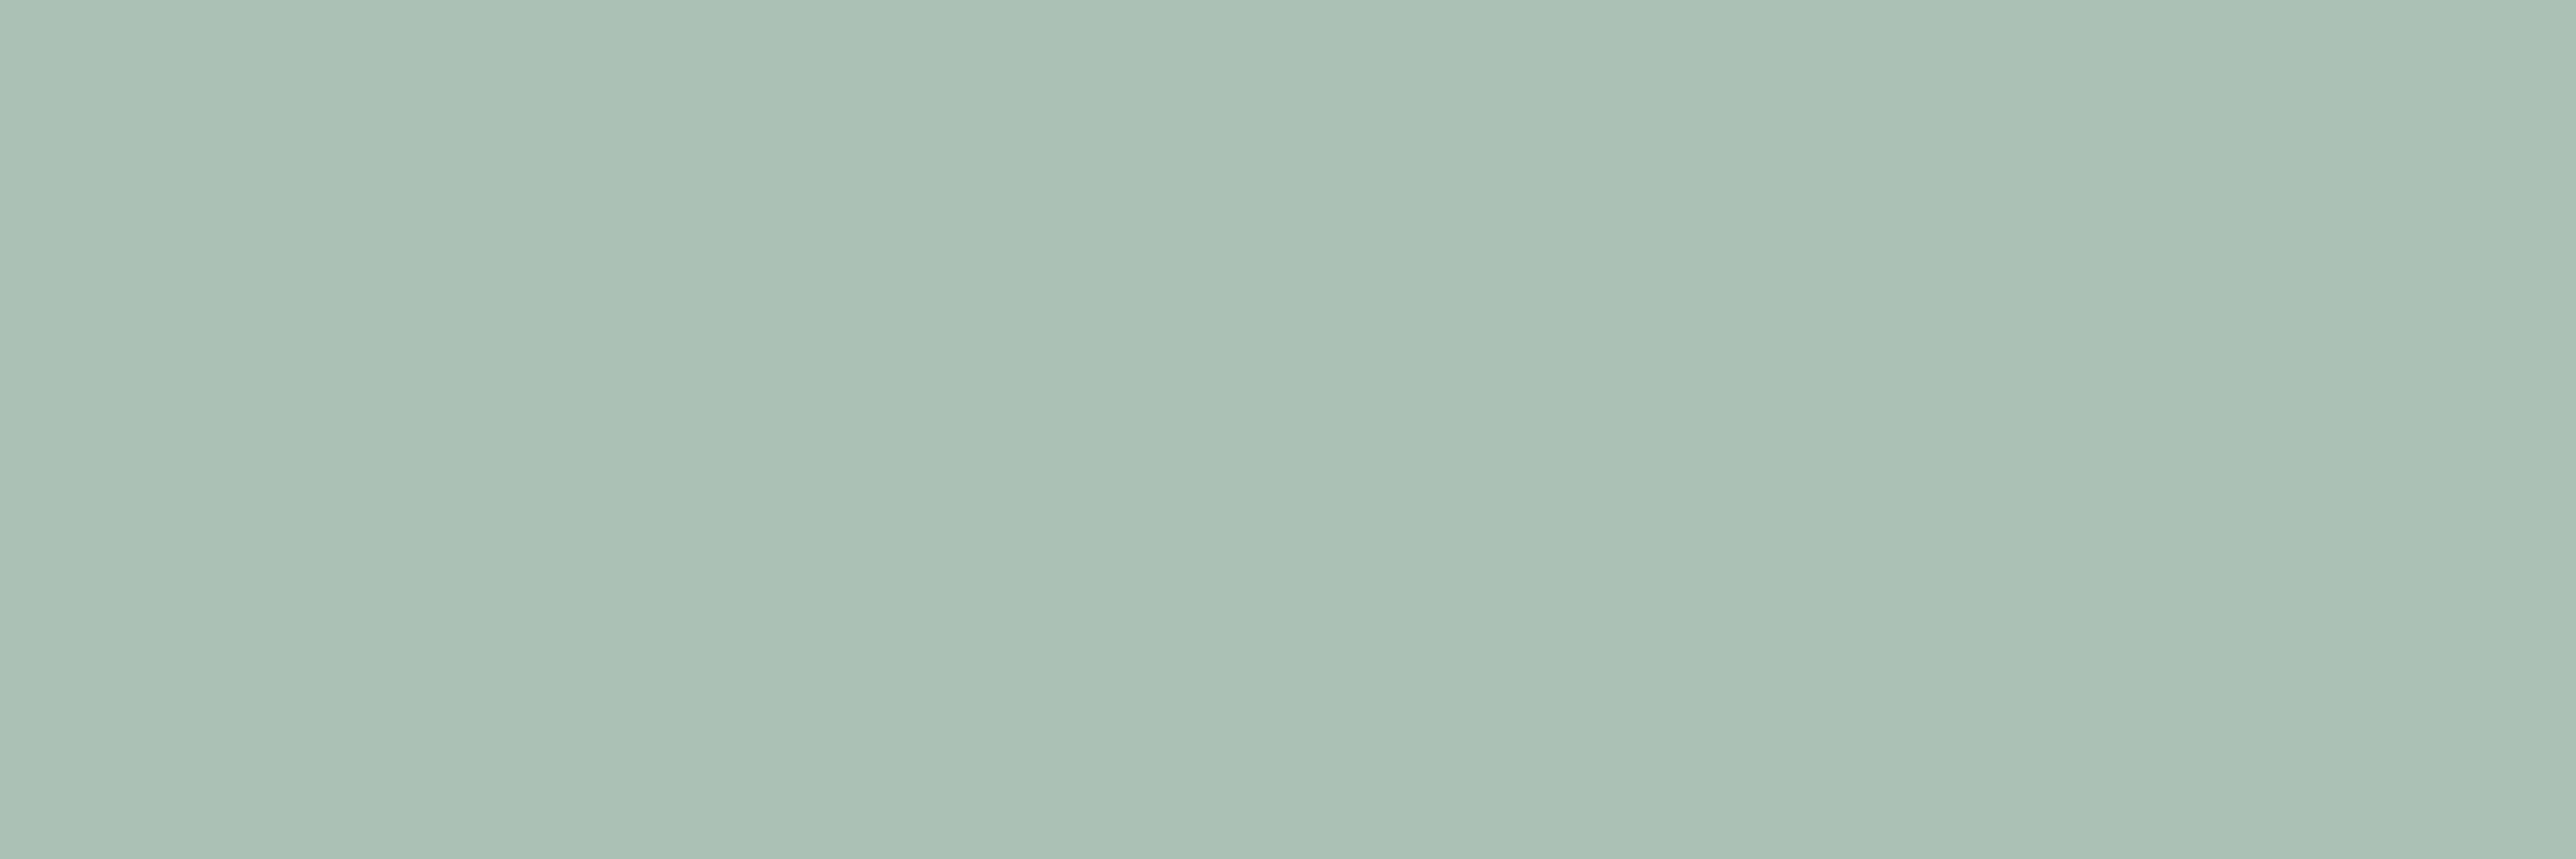 Glina Green Gloss Ceramic Indoor Wall Tile, Pack of 34, (L)297mm (W)97mm